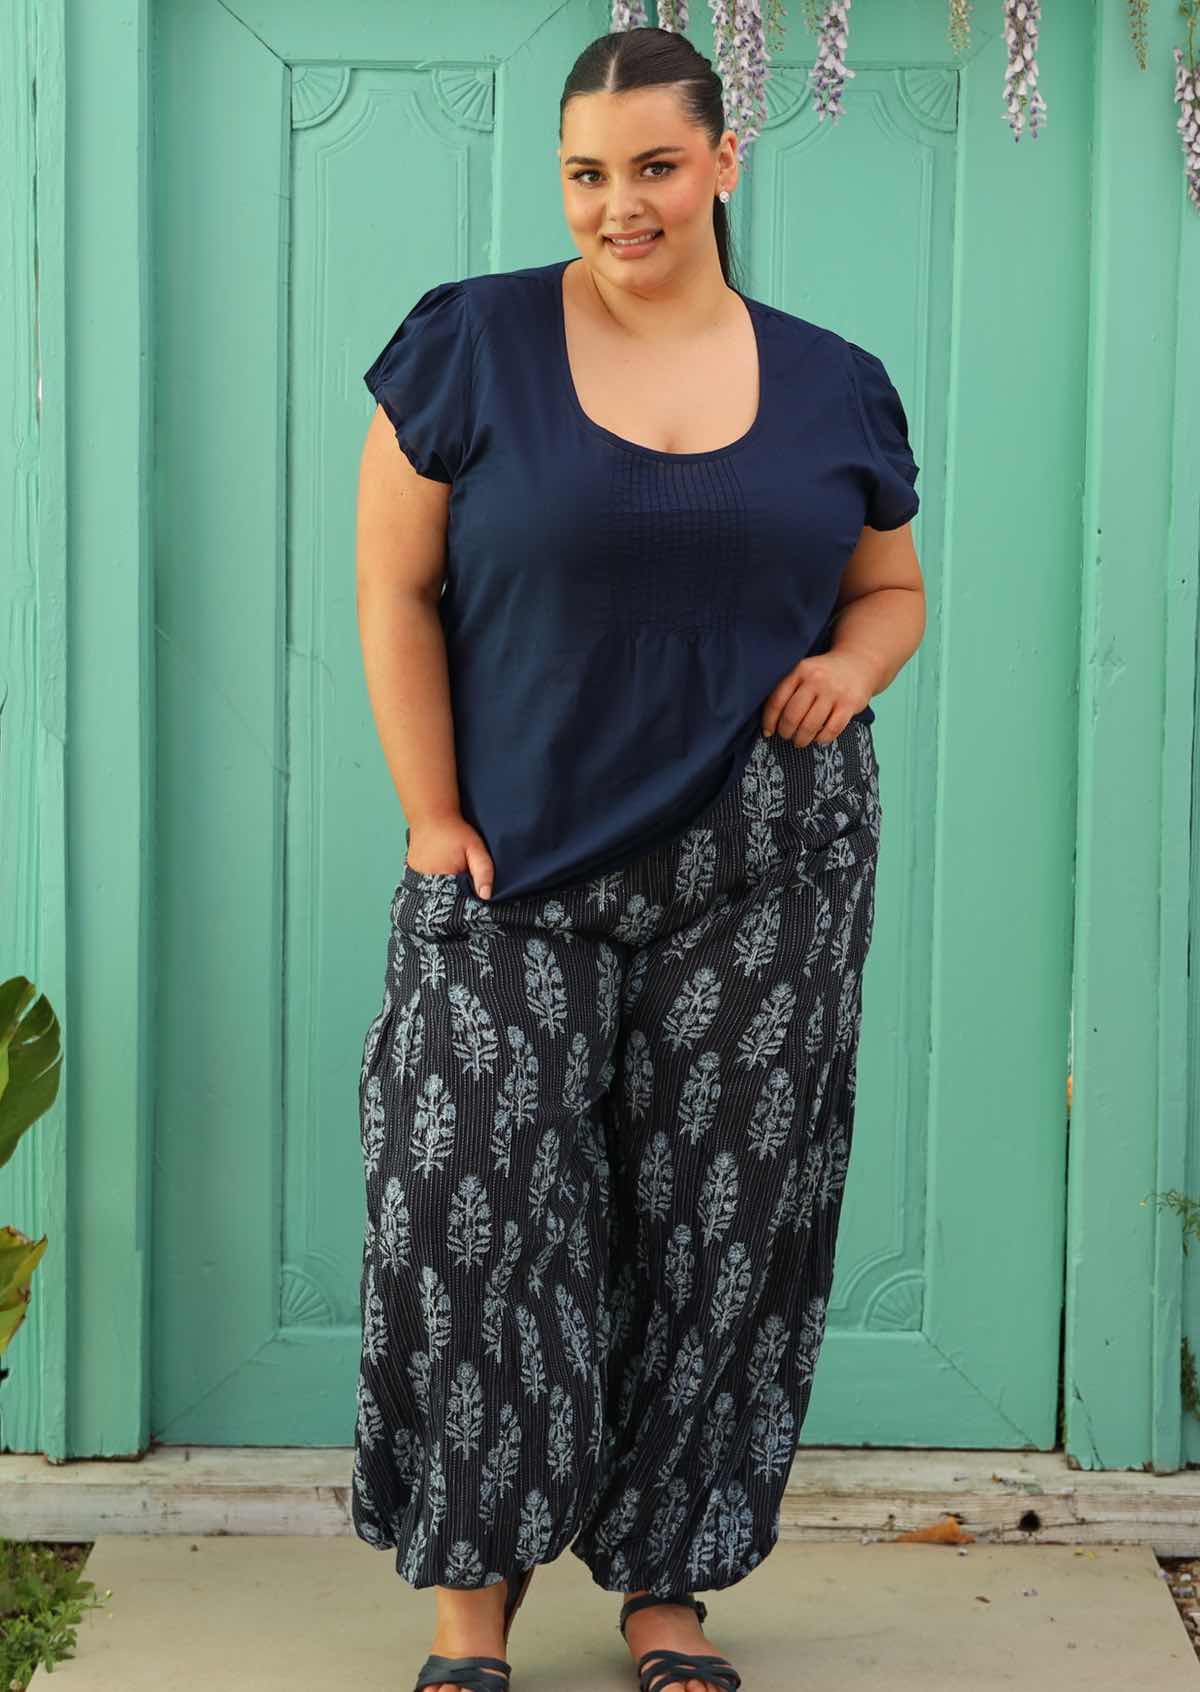 size 18 model wearing navy blue cotton top